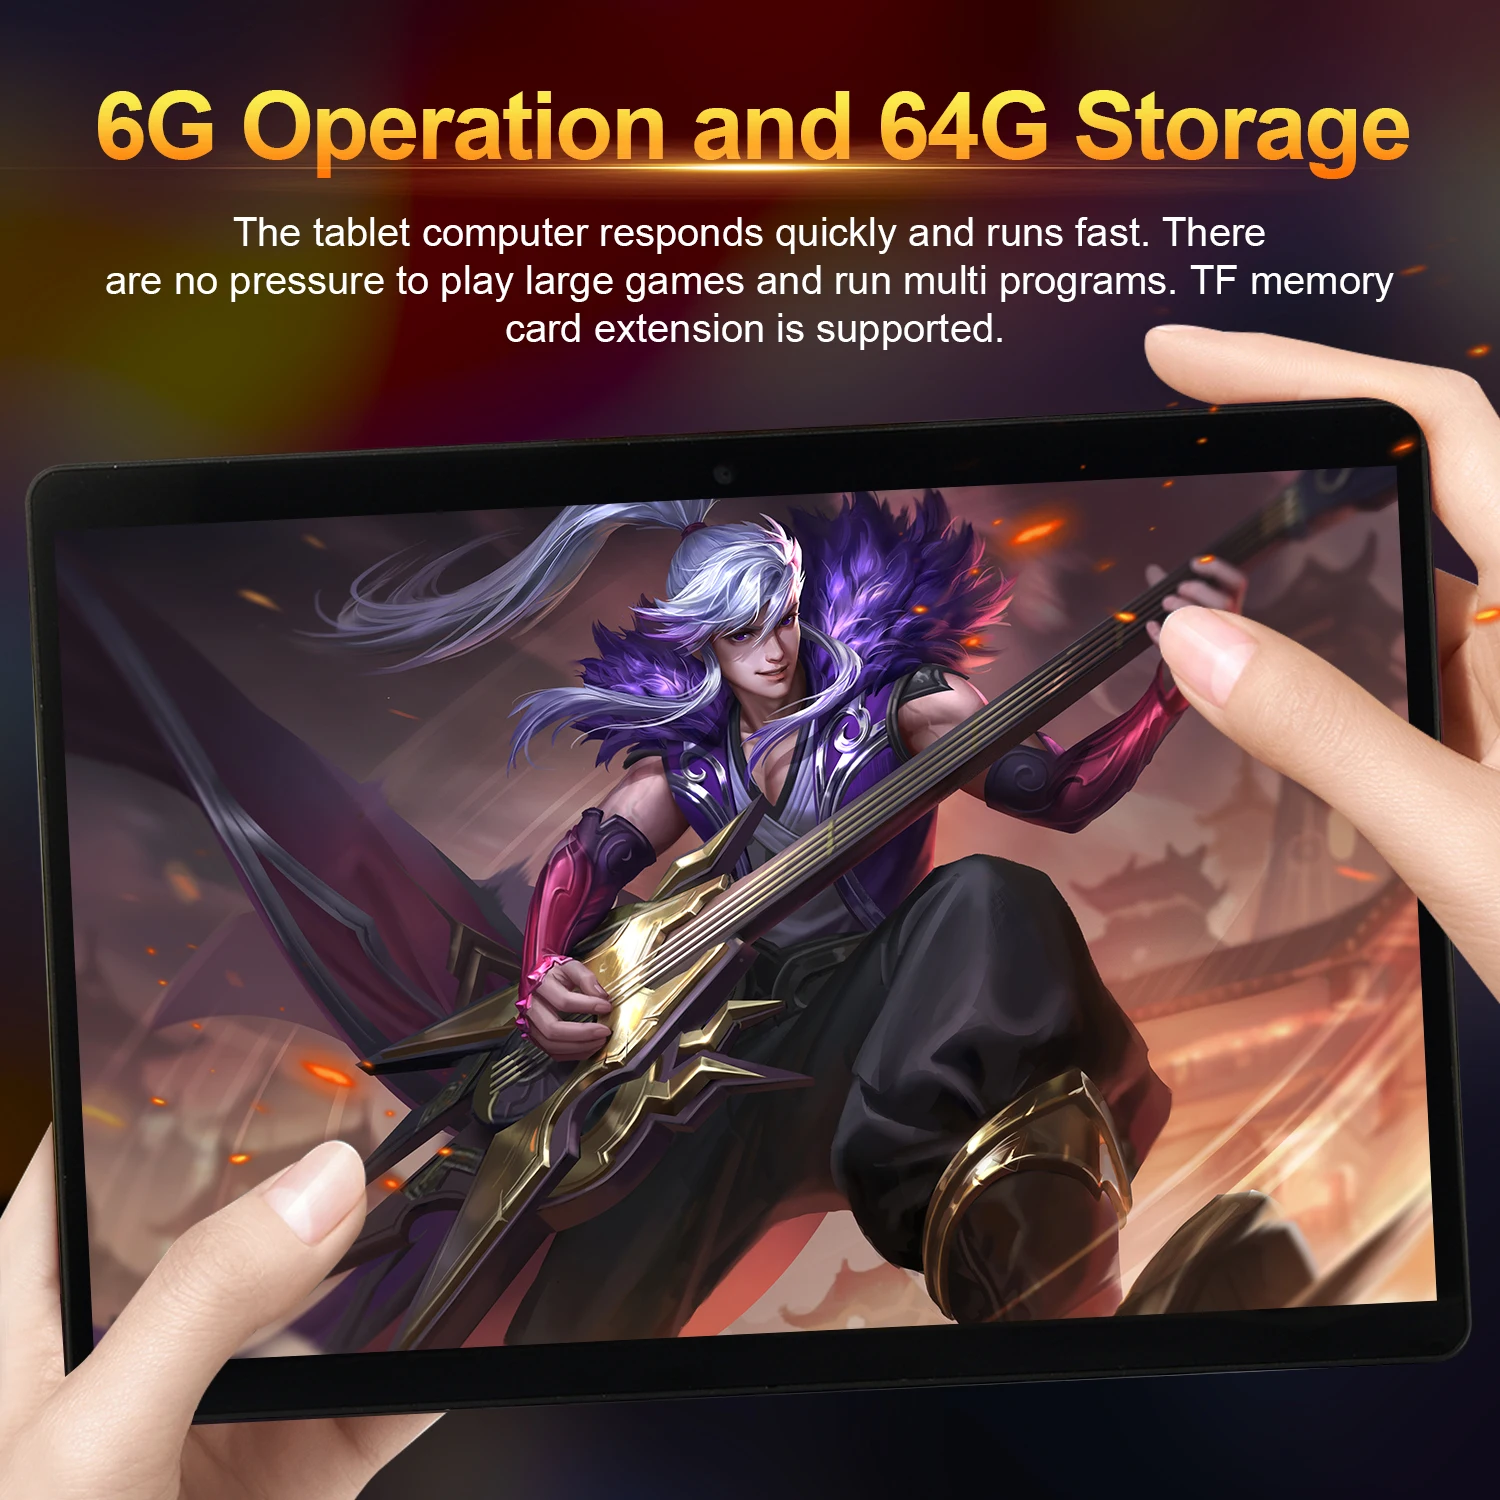 5G Tablet PC 10.1 Inch 8800mAh 12G RAM 512G ROM New Pad Tablette WIFI GPS Bluetooth 13MP Camera Google Play WPS Office 10 Core best inexpensive tablet